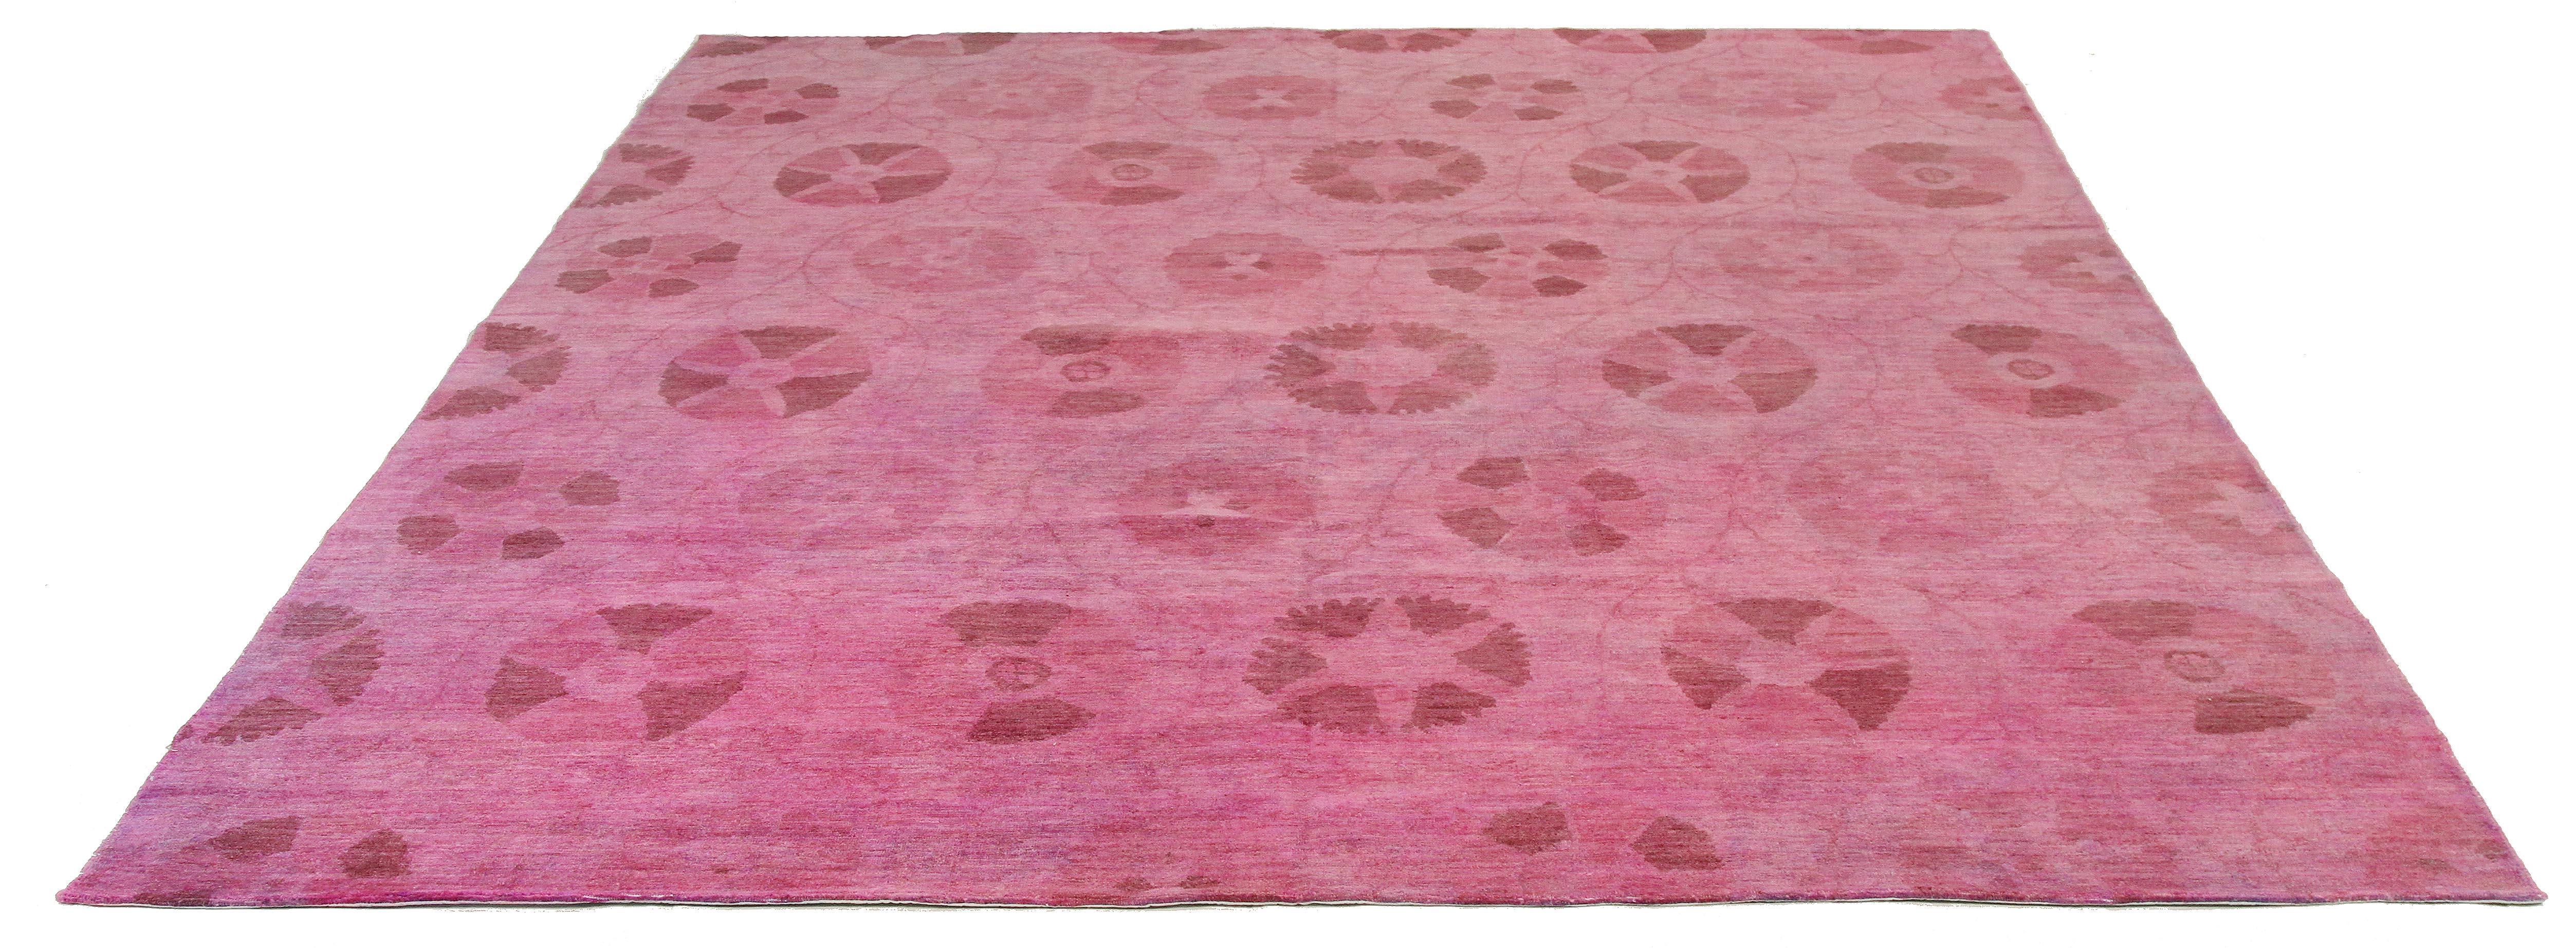 Afghan rug handwoven from the finest sheep’s wool and colored with all-natural vegetable dyes that are safe for humans and pets. It’s a contemporary Afghan design featuring lovely botanical patterns of brown and overdyed with pink and purple hues.